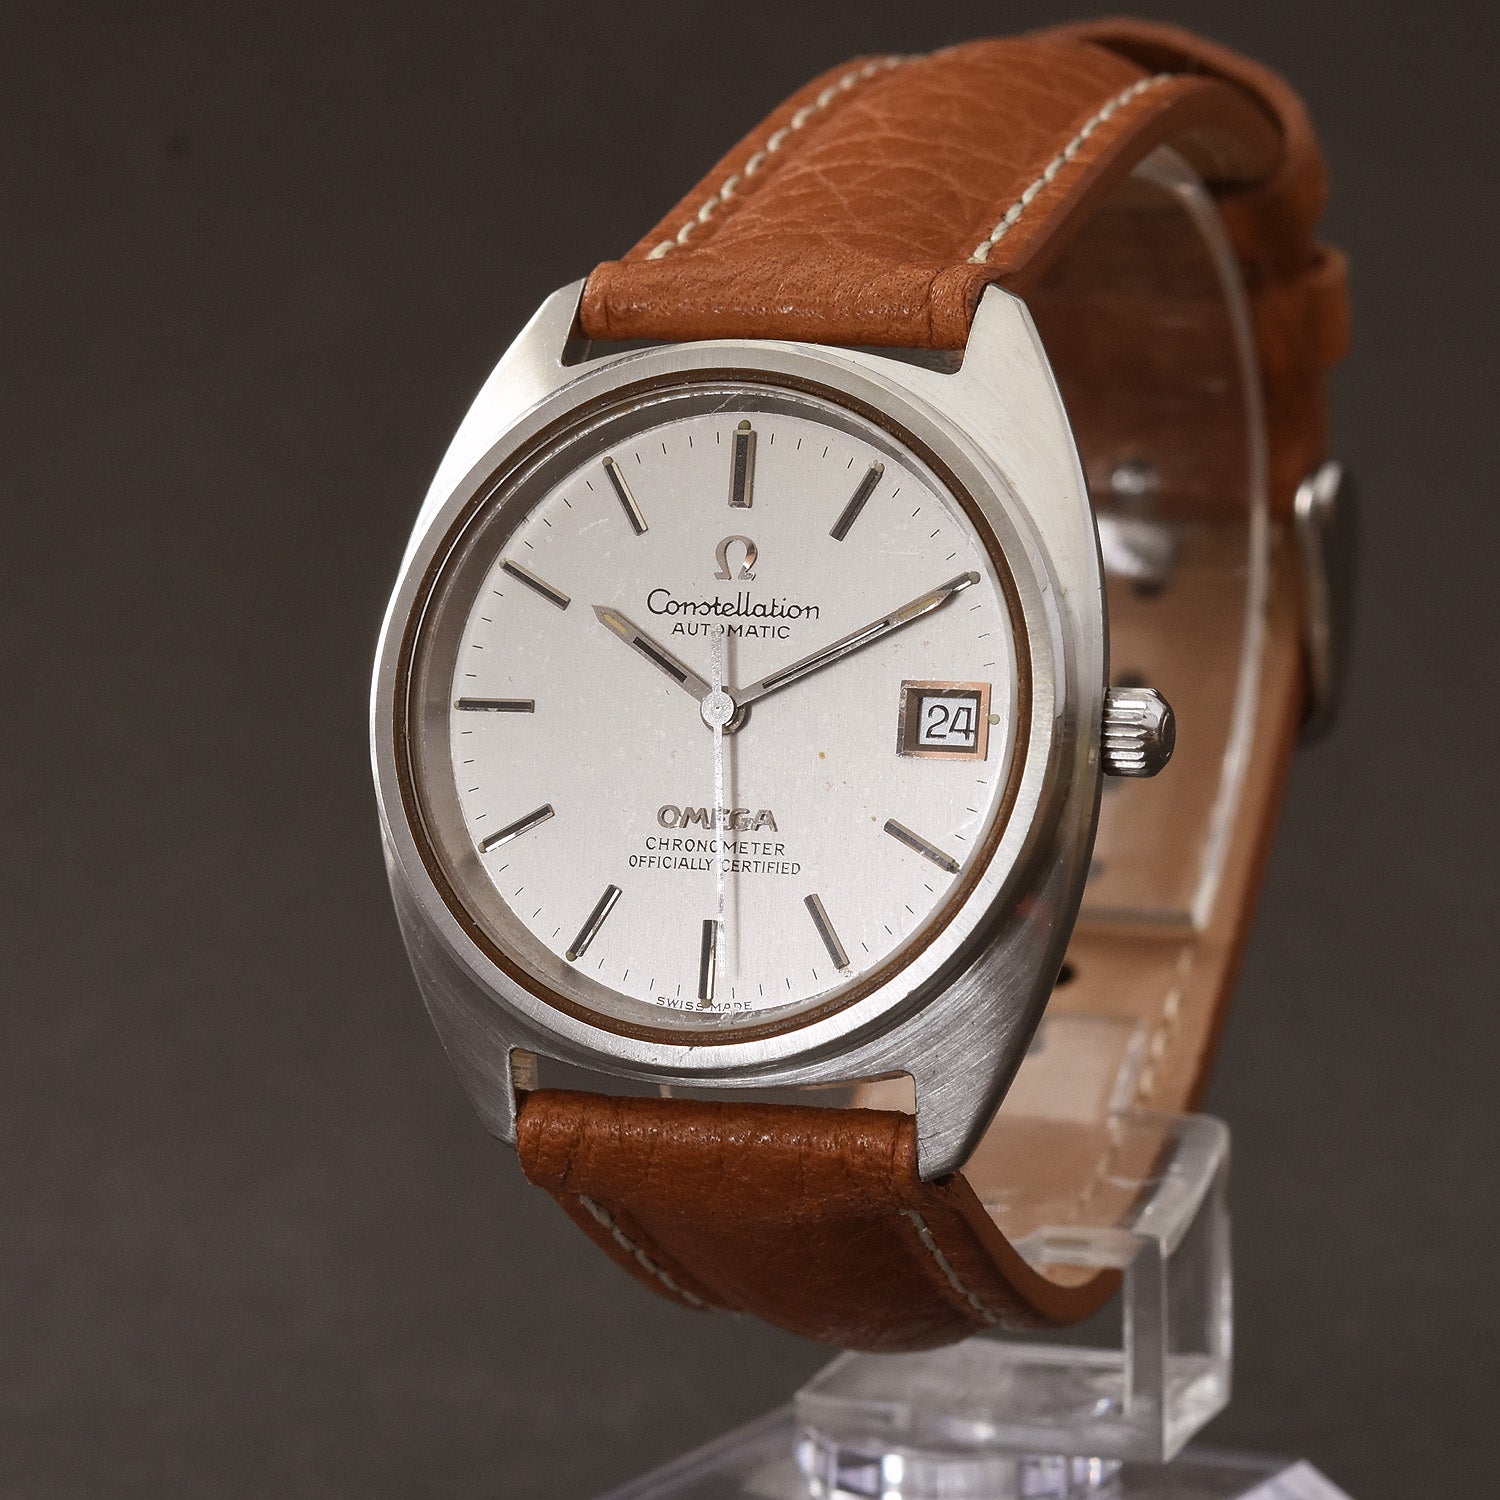 1972 OMEGA Constellation Automatic Gents Date Watch 168.0056